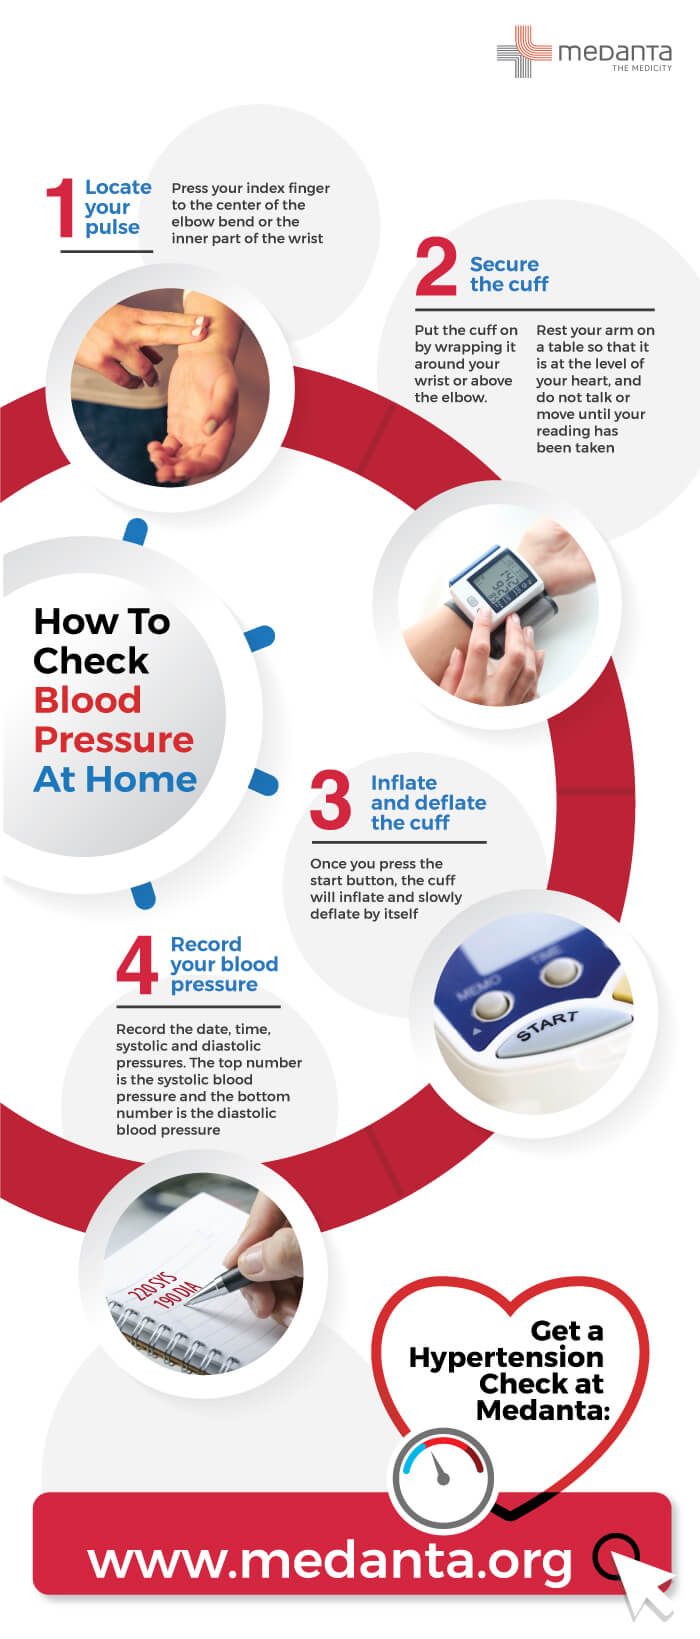 Should you check your blood pressure at home?